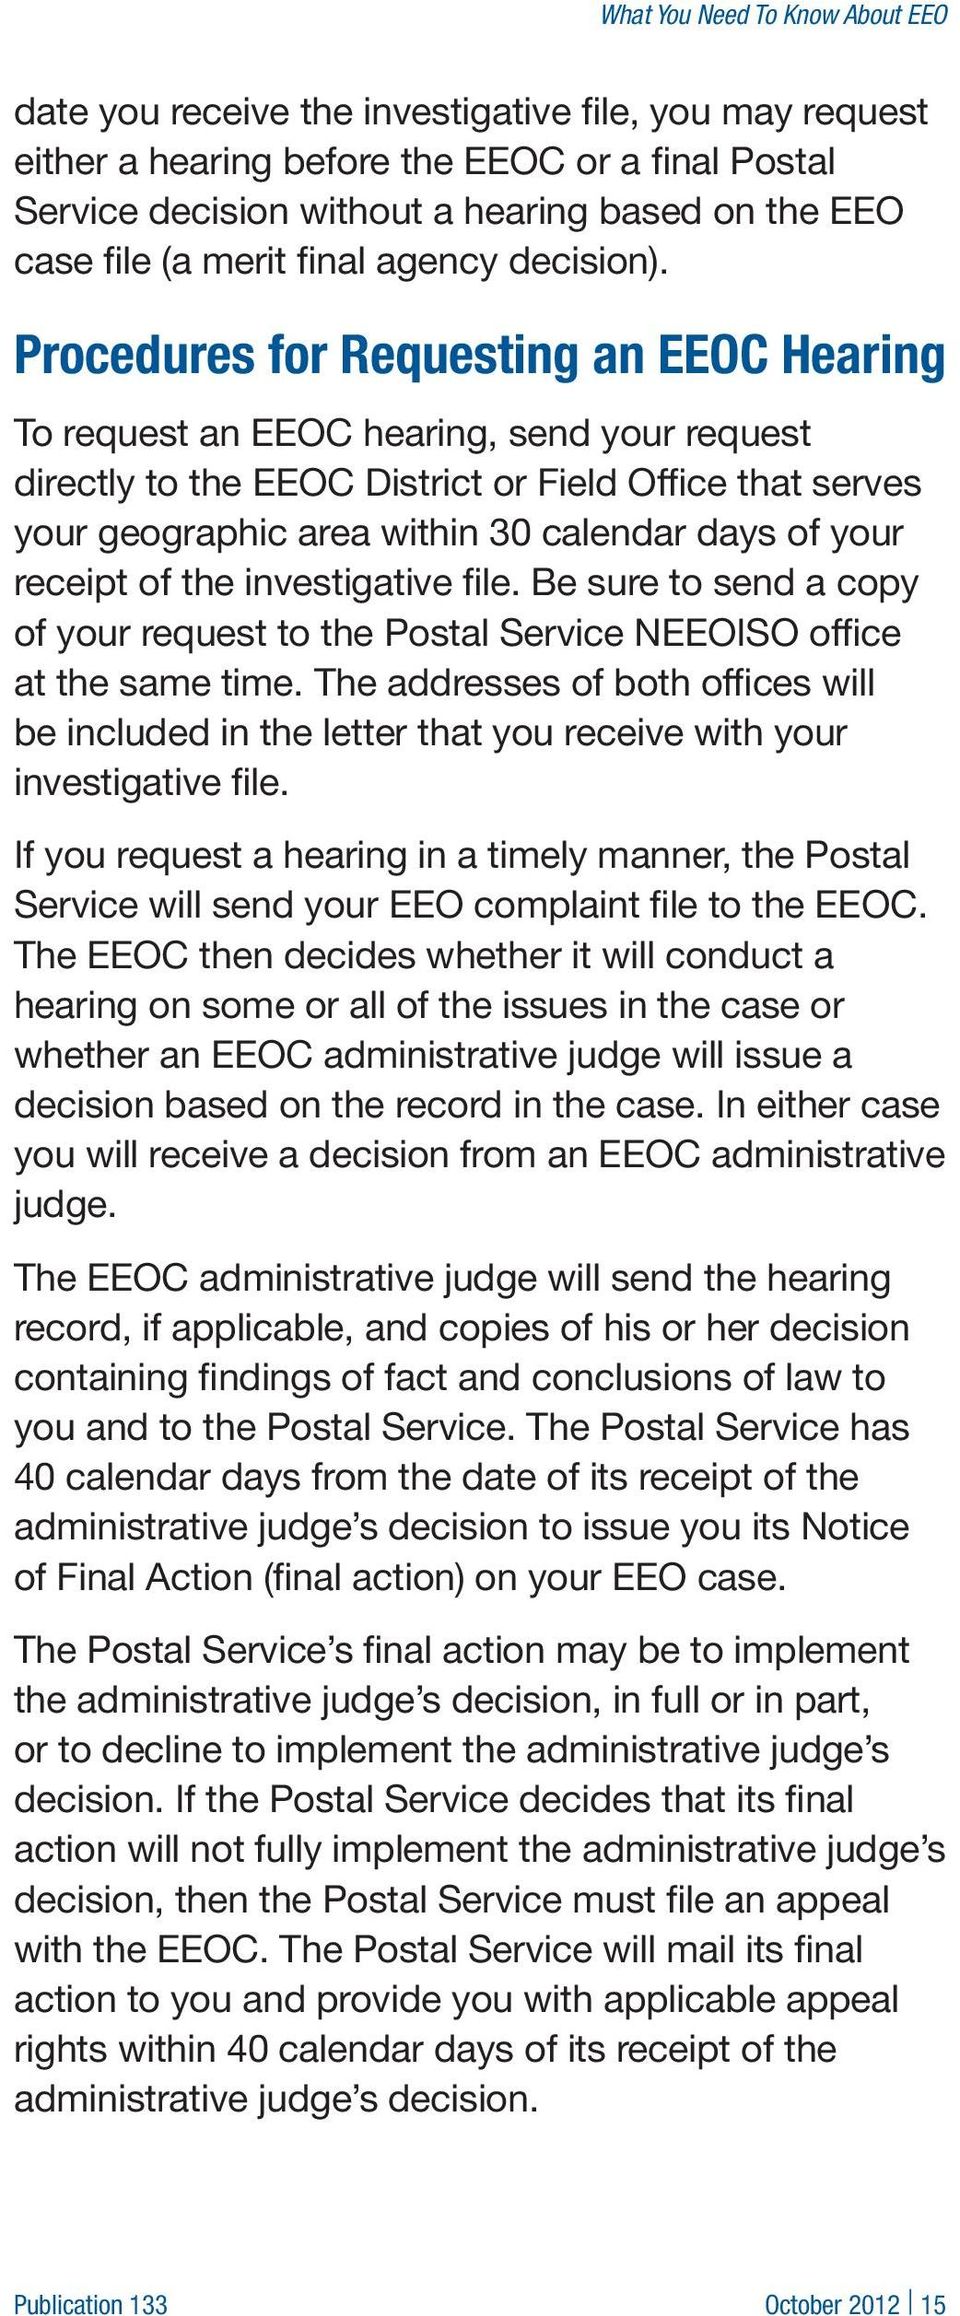 Procedures for Requesting an EEOC Hearing To request an EEOC hearing, send your request directly to the EEOC District or Field Office that serves your geographic area within 30 calendar days of your